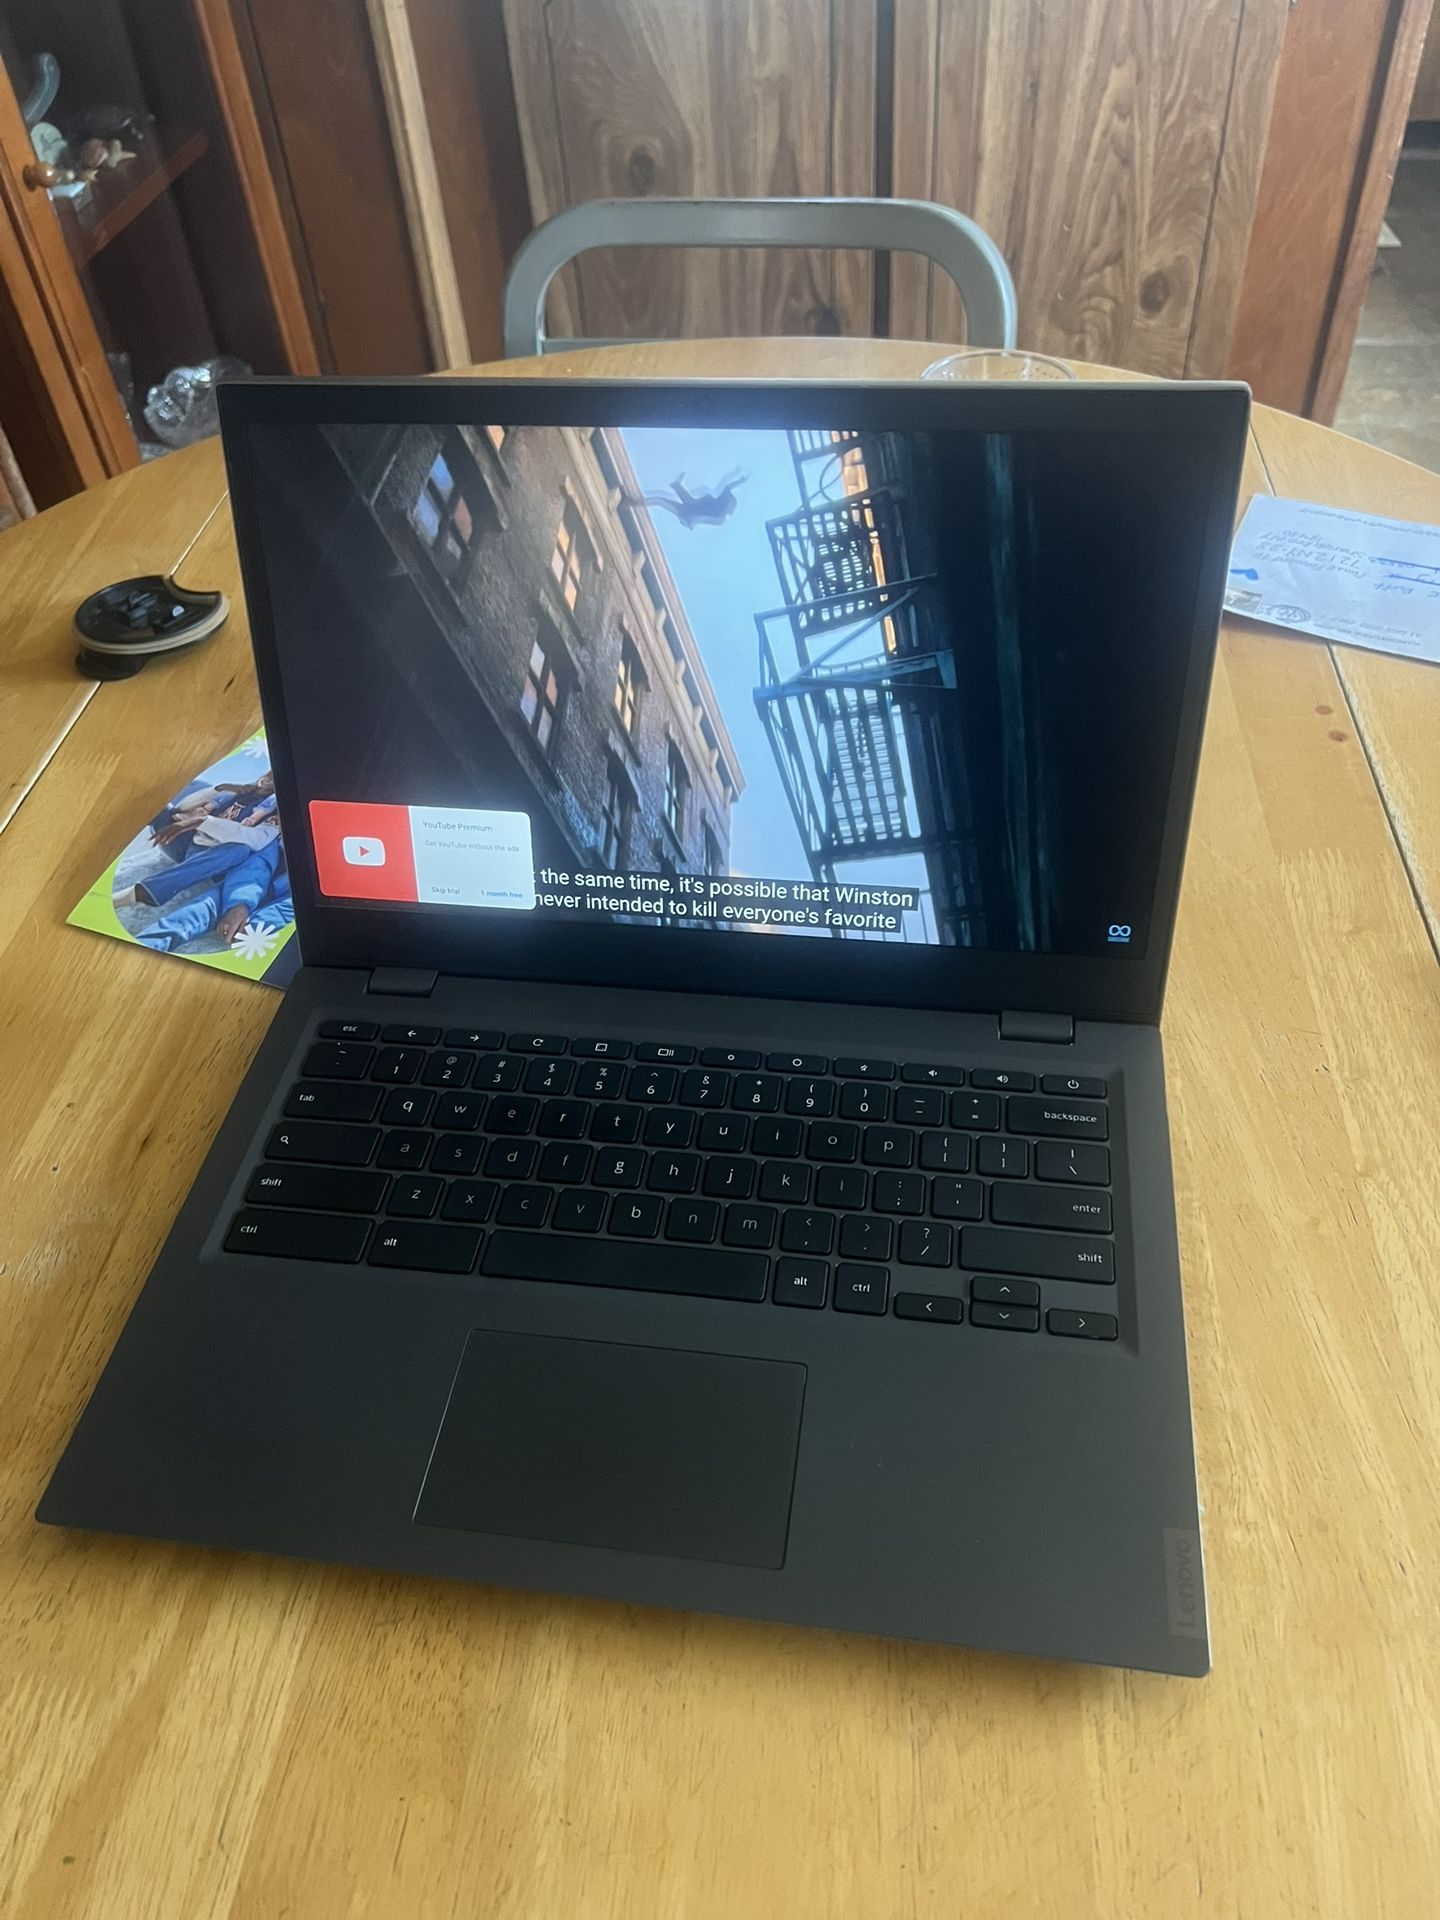 laptop touchscreen lenovo 14 inches like new condition 